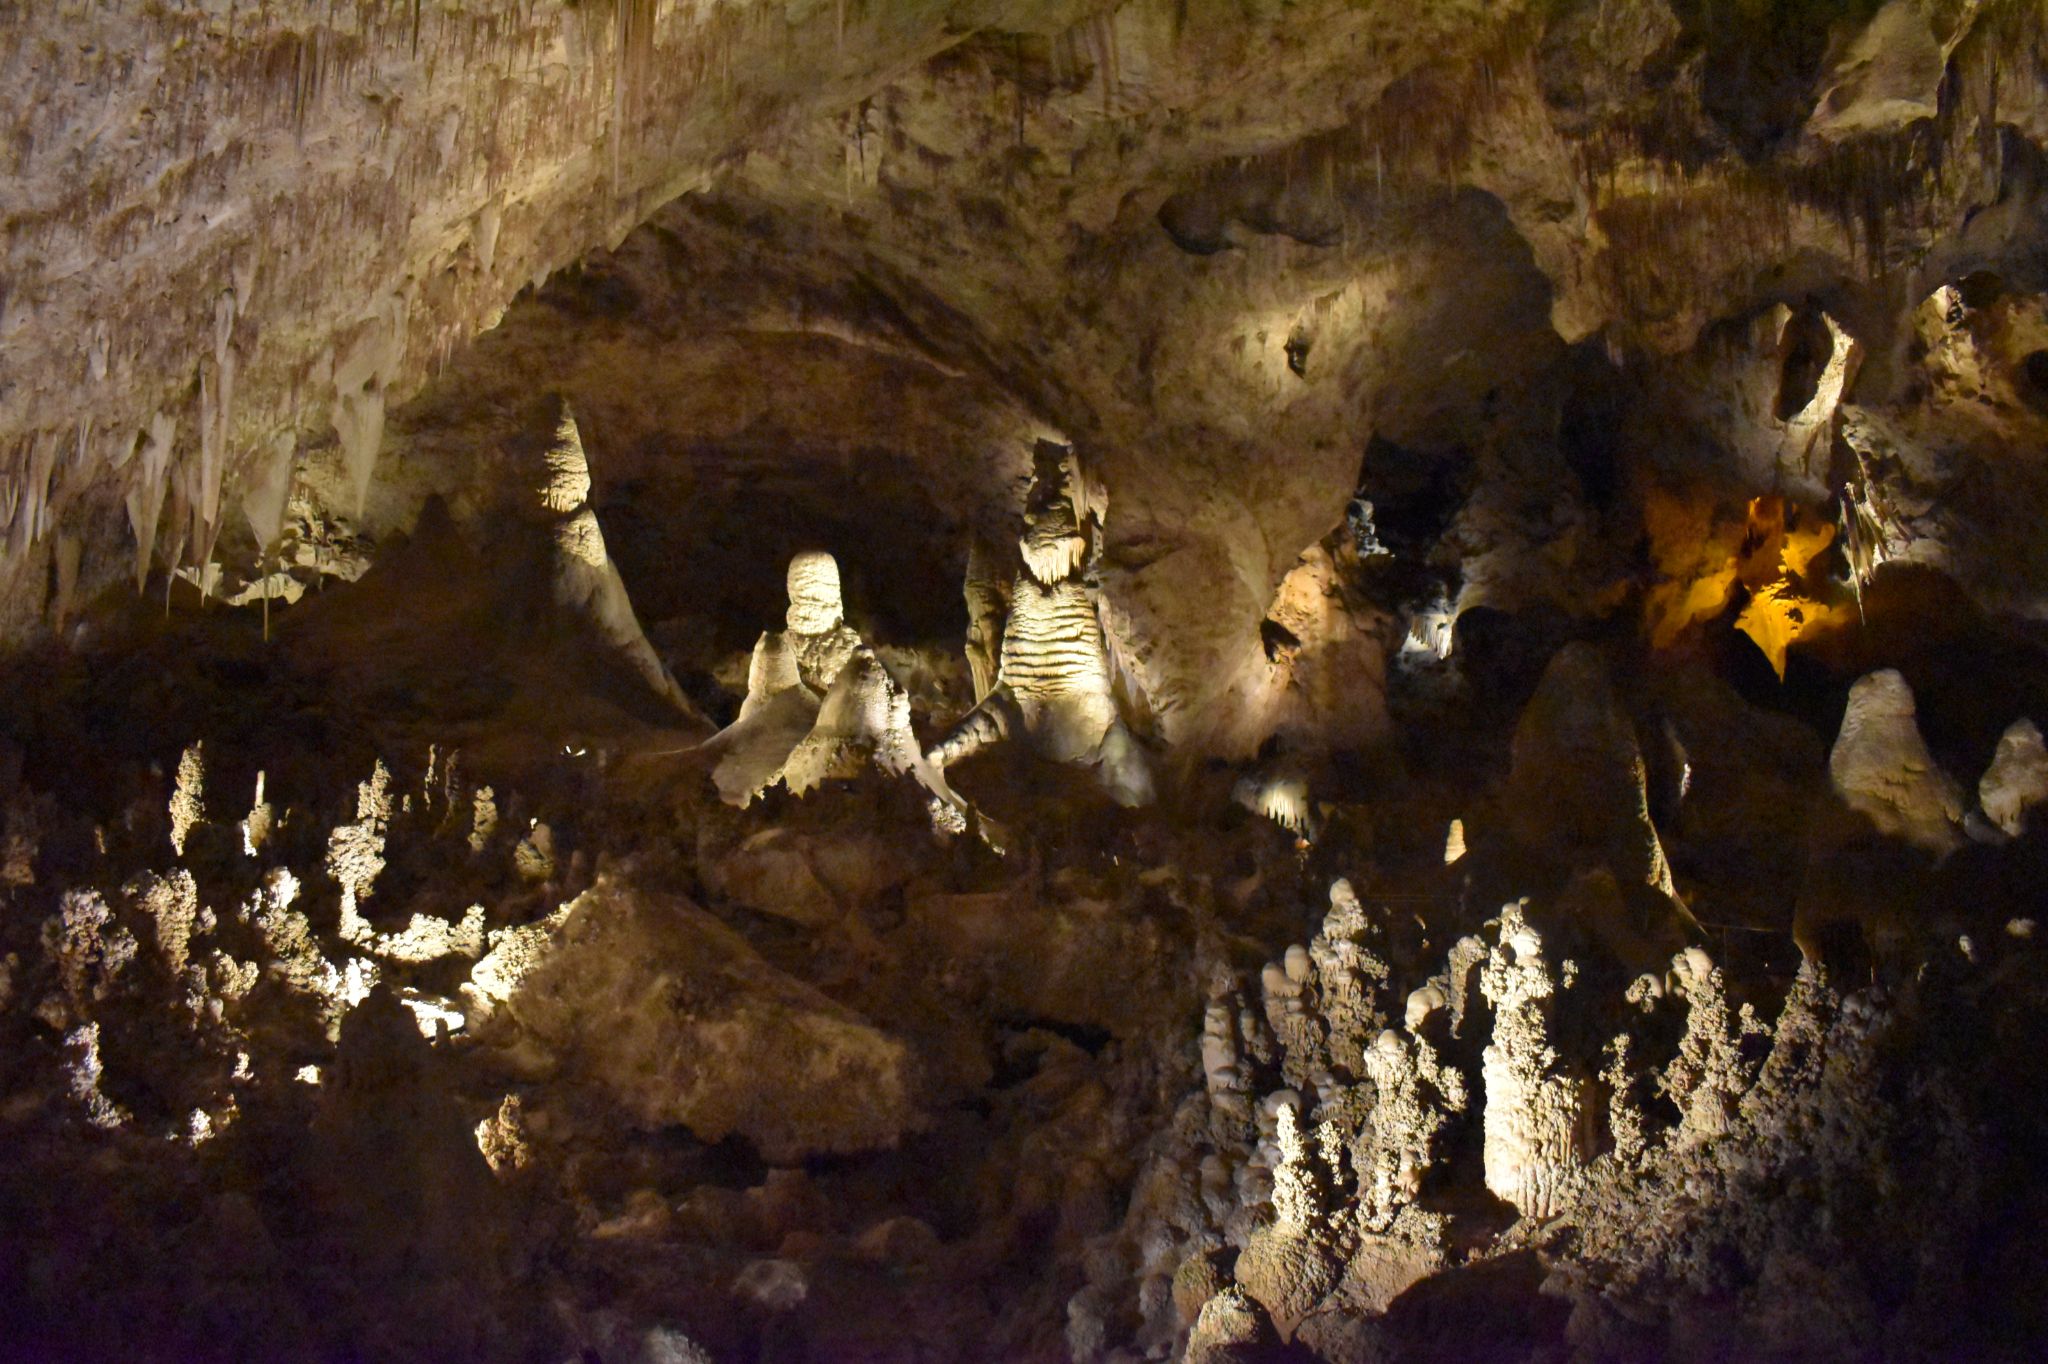 Community photo by James Gaulding | Carlsbad Caverns National Park, New Mexico, U.S.A.